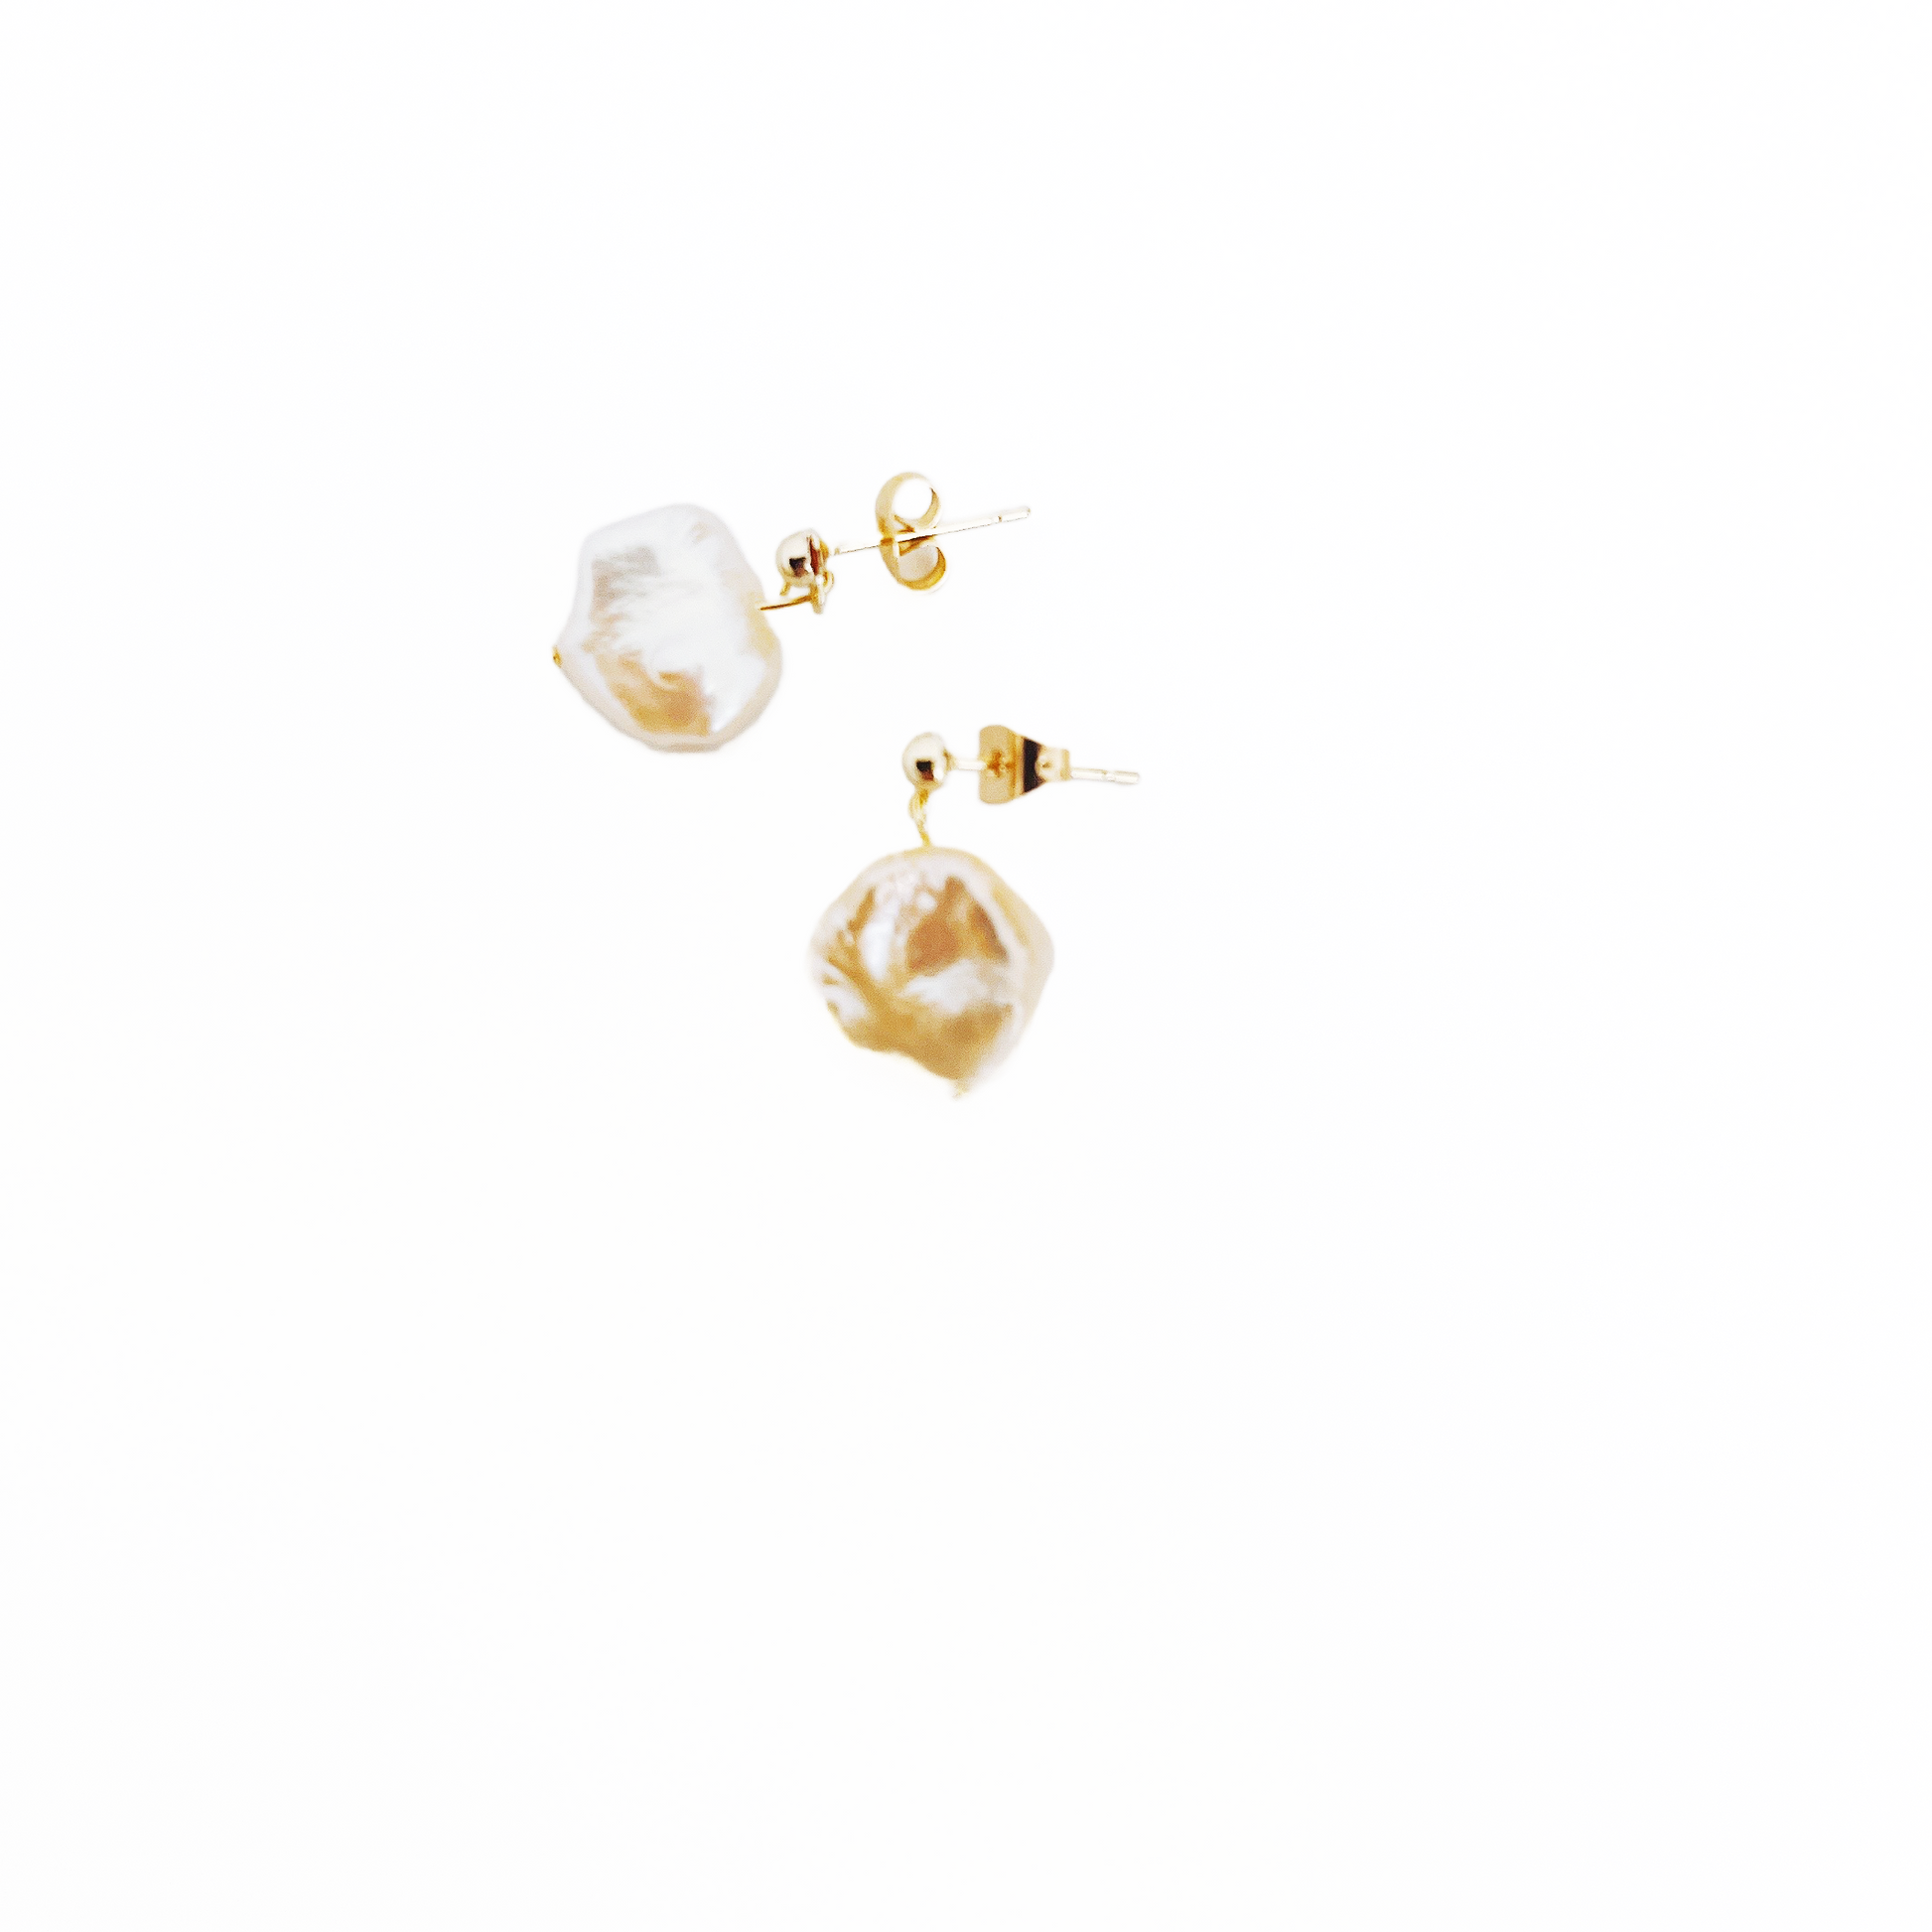 Natural Flatish Baroque Pearl Earring White or Purple, 14k gold filled by Hikaru Pearl